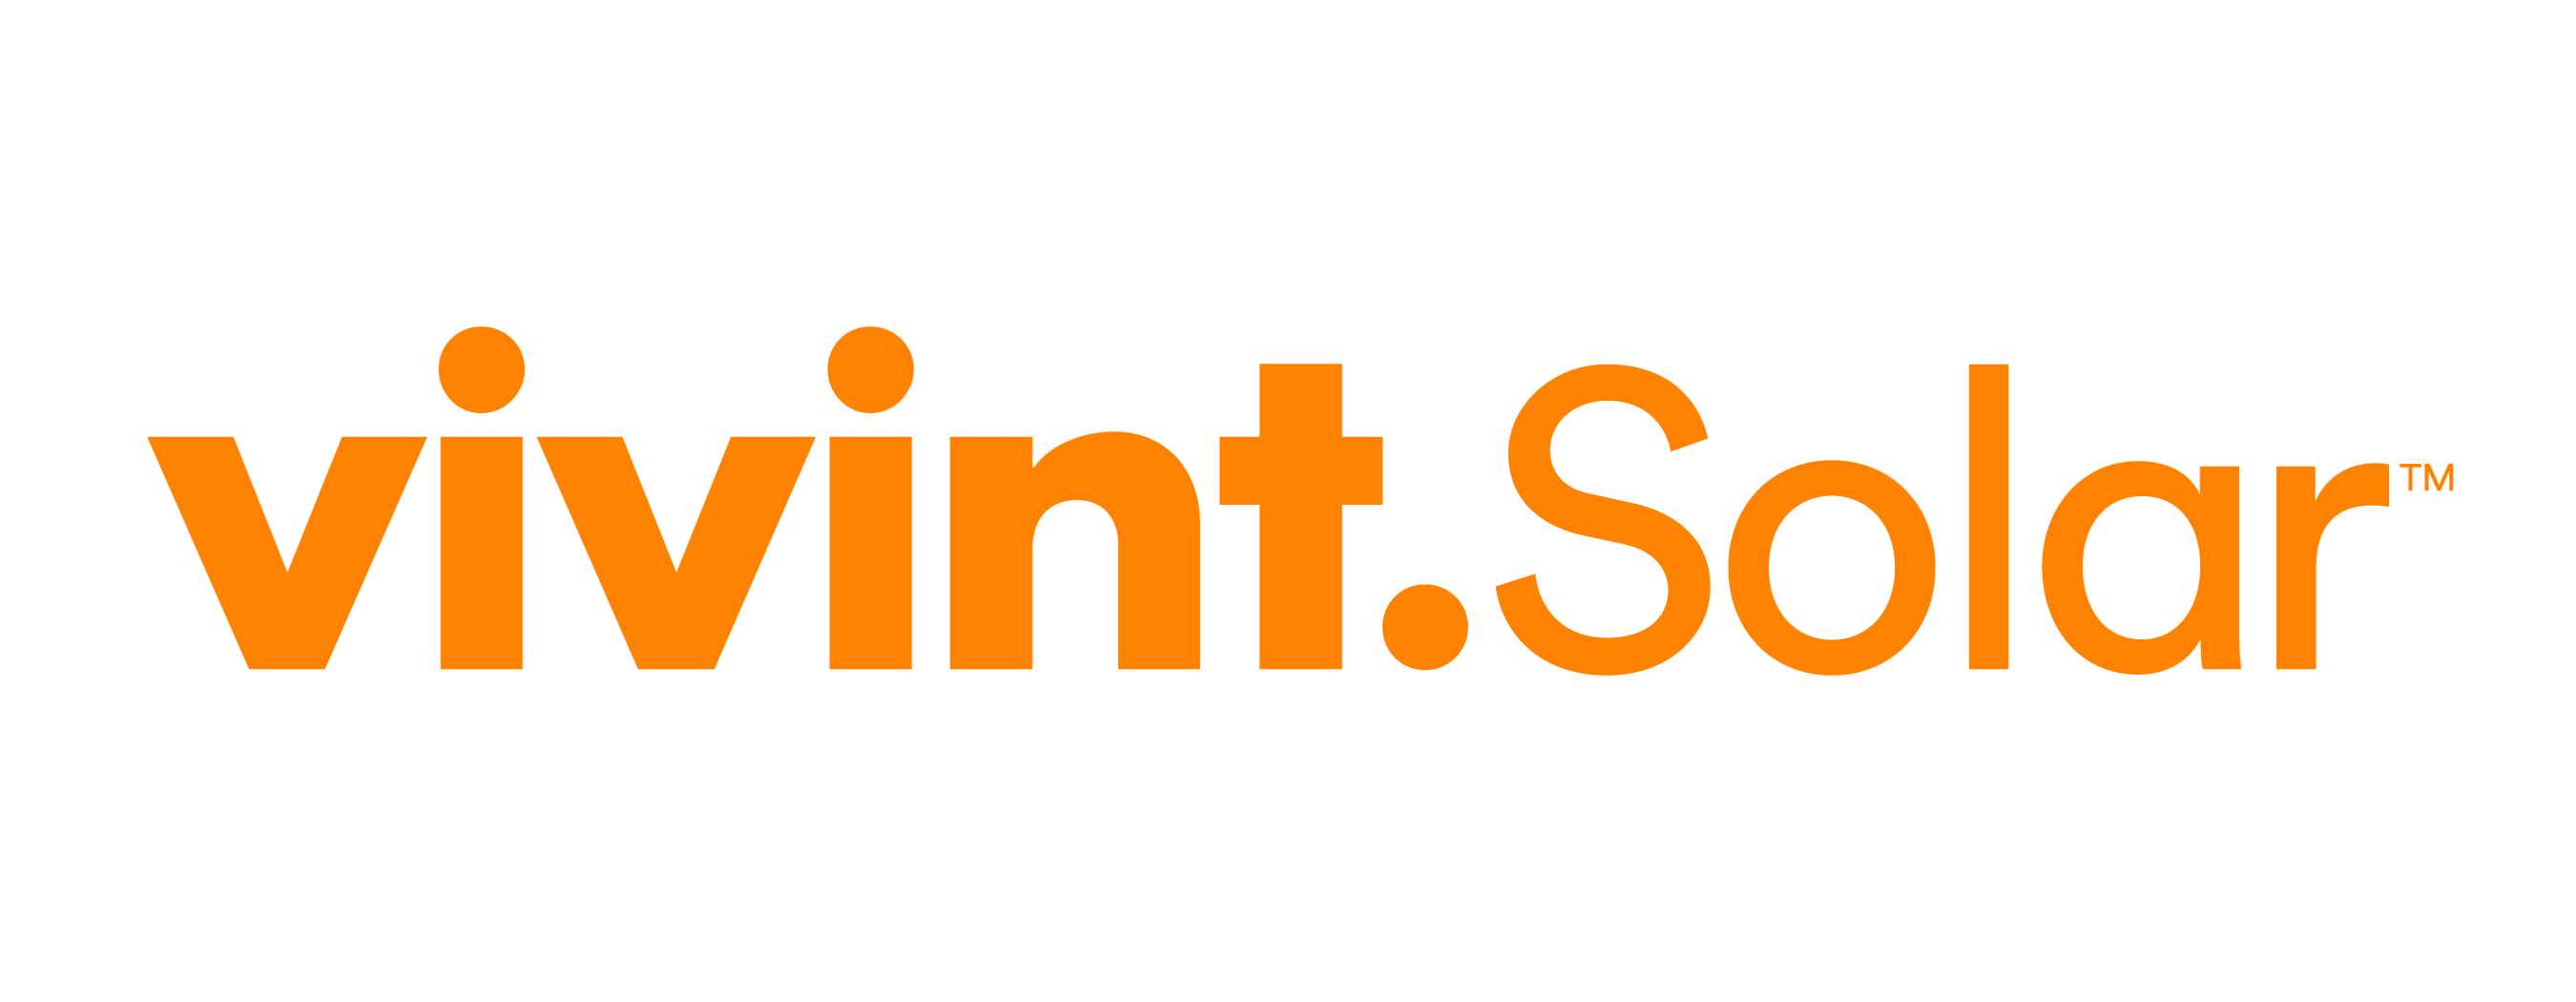 Vivint Solar Secures New $325 Million Credit Facility Lowering Cost of Debt